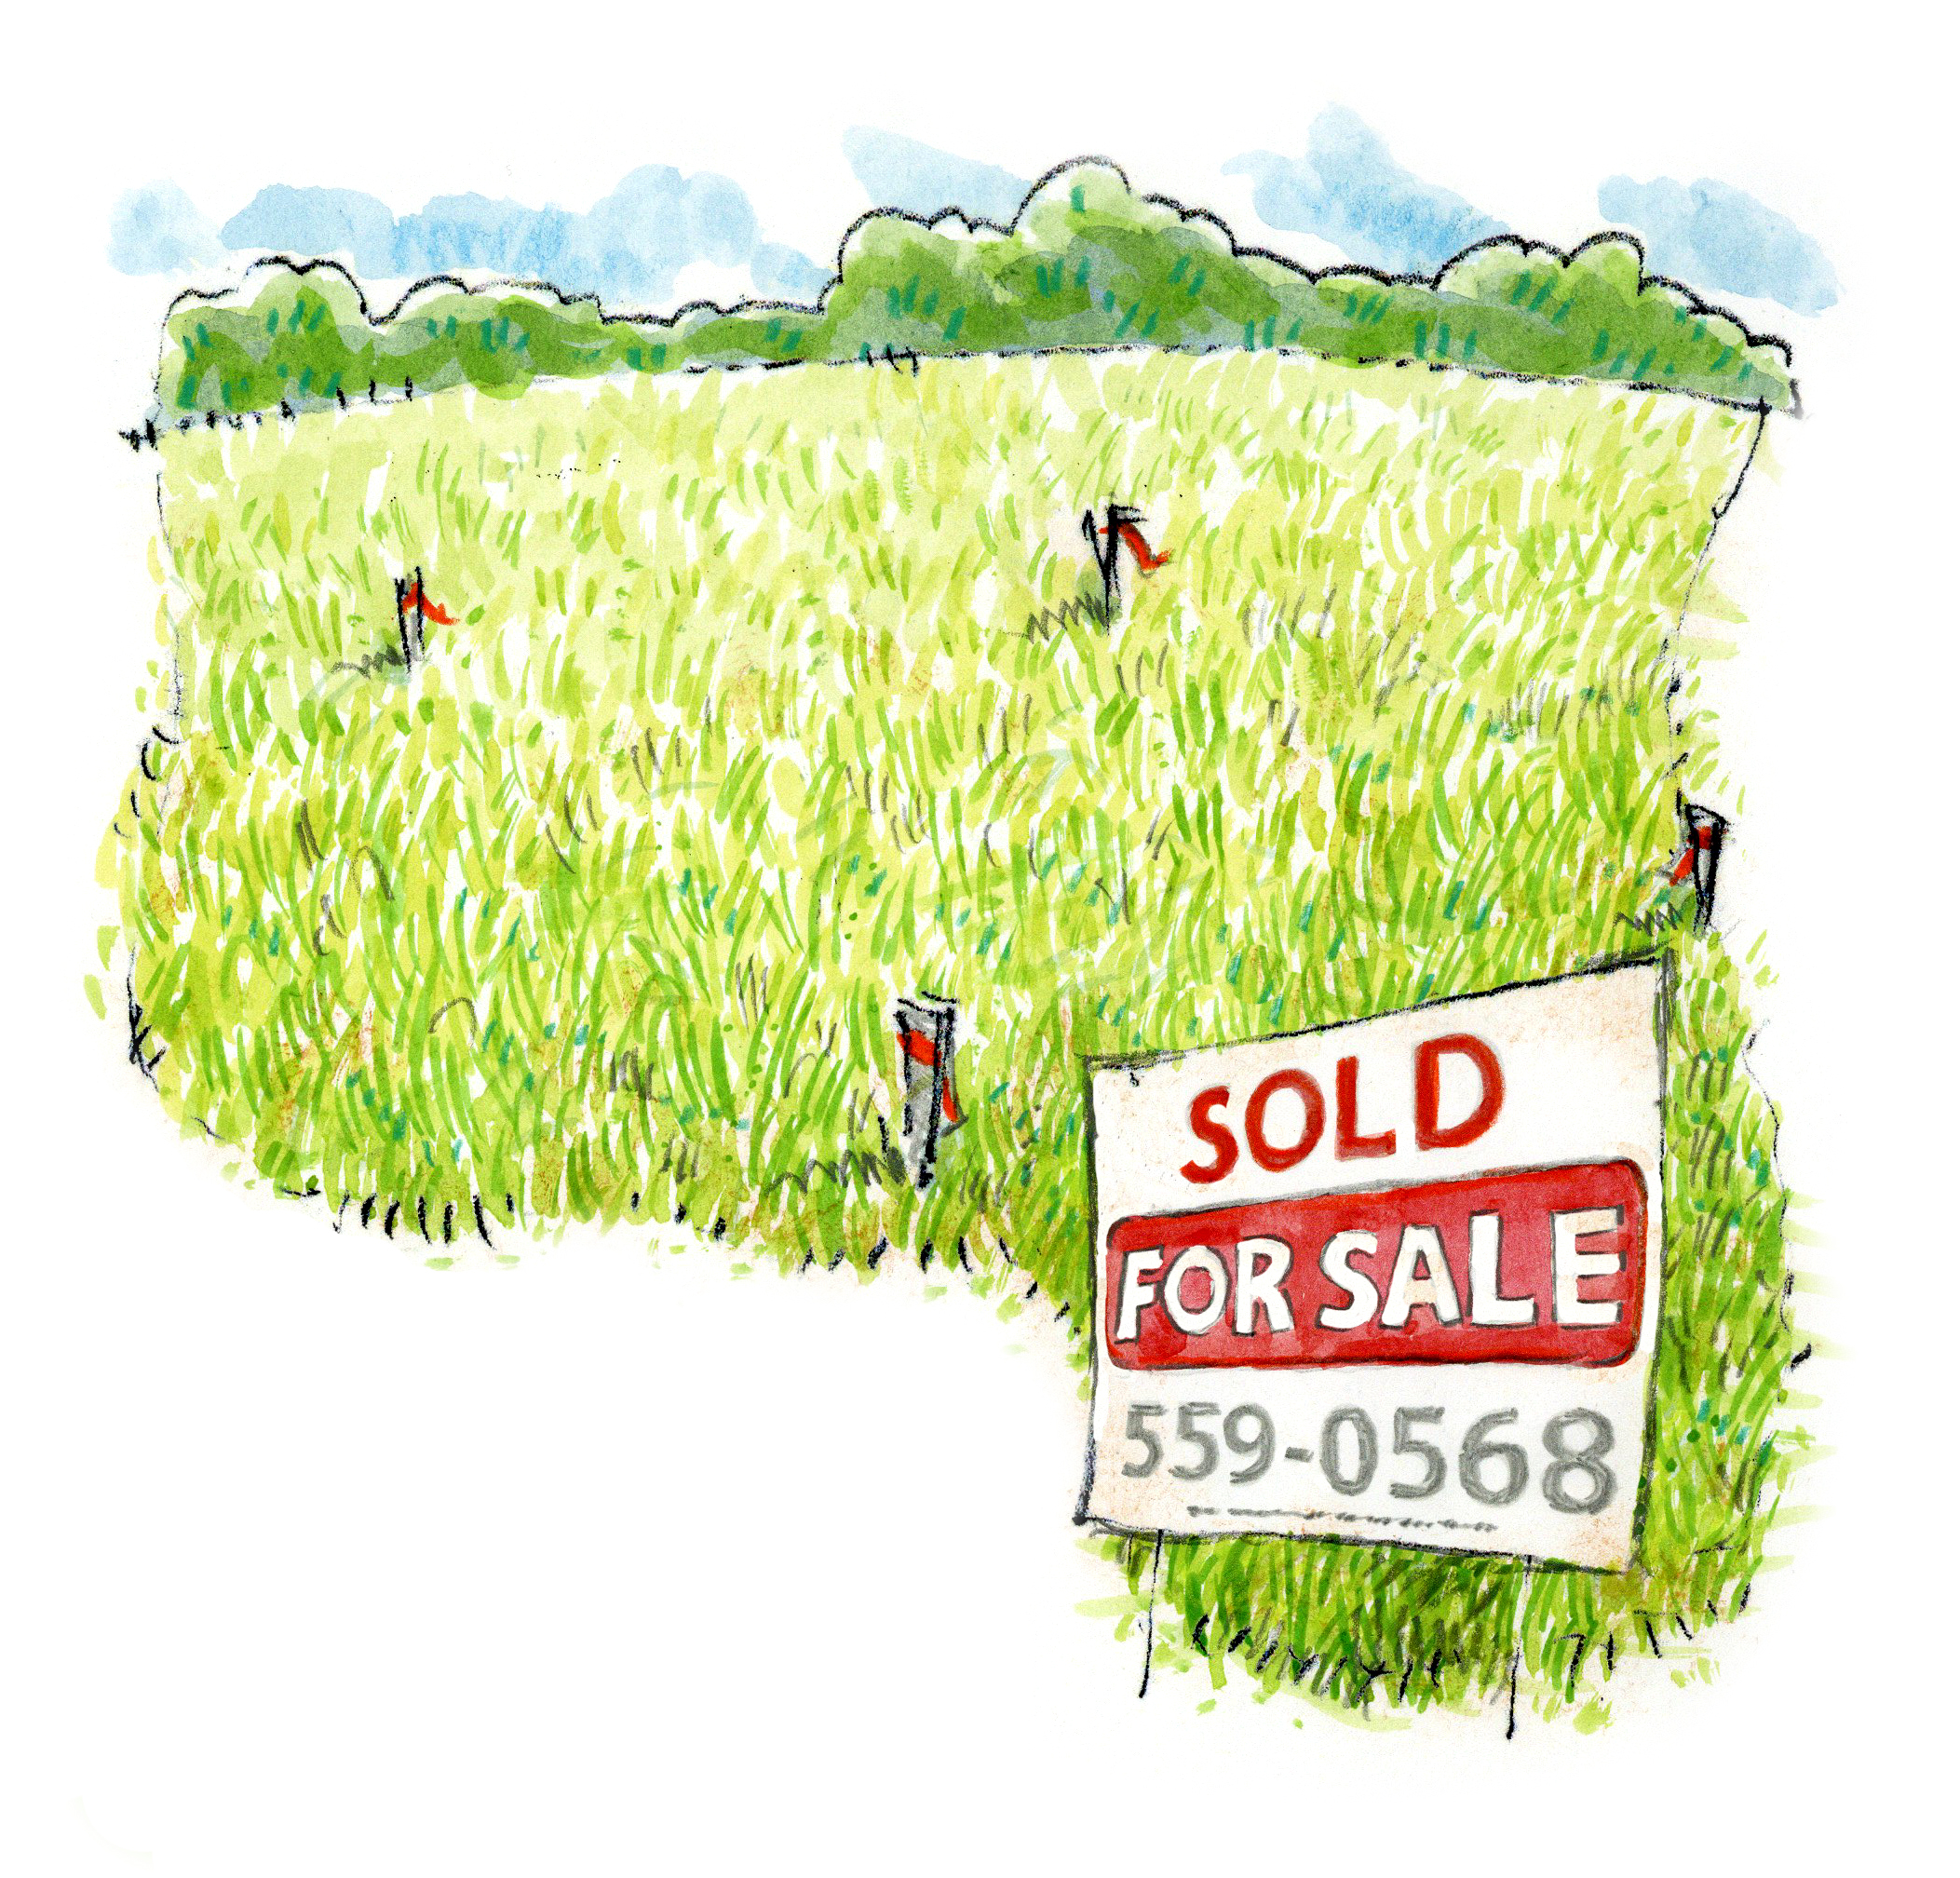 cleared land with for sale sign